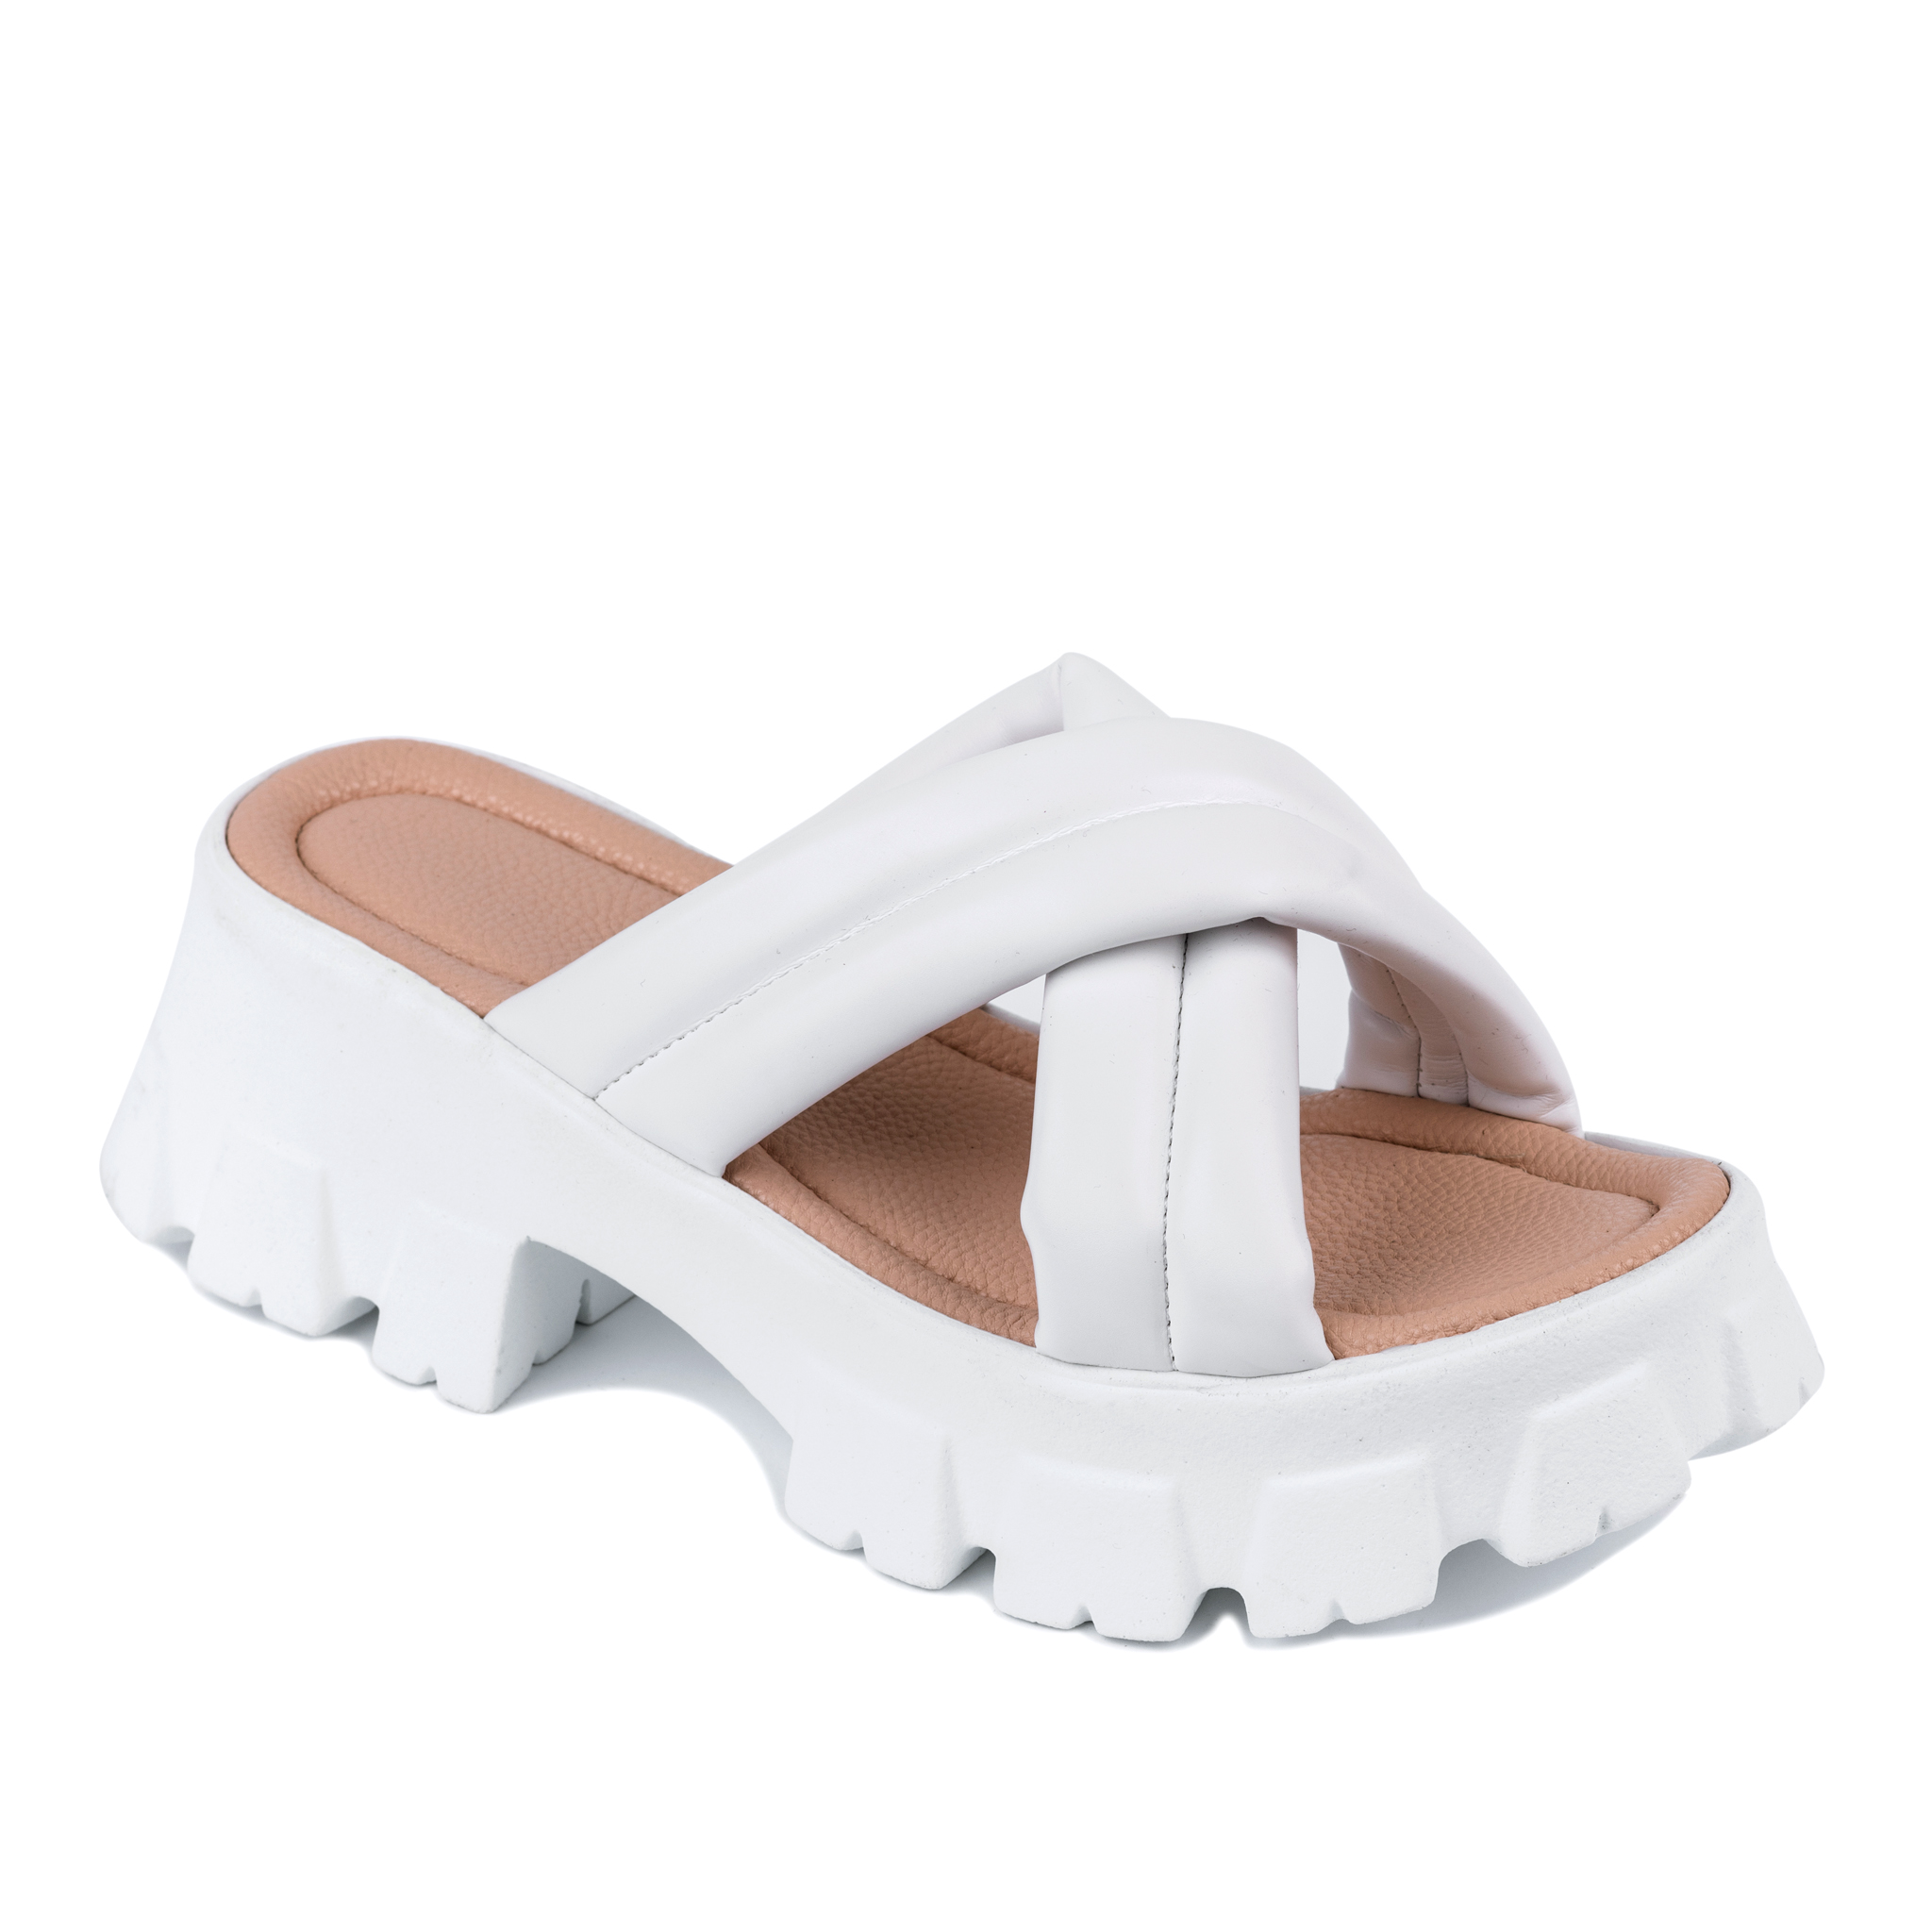 CROSS - STRAP HIGH SOLE SLIPPERS - WHITE